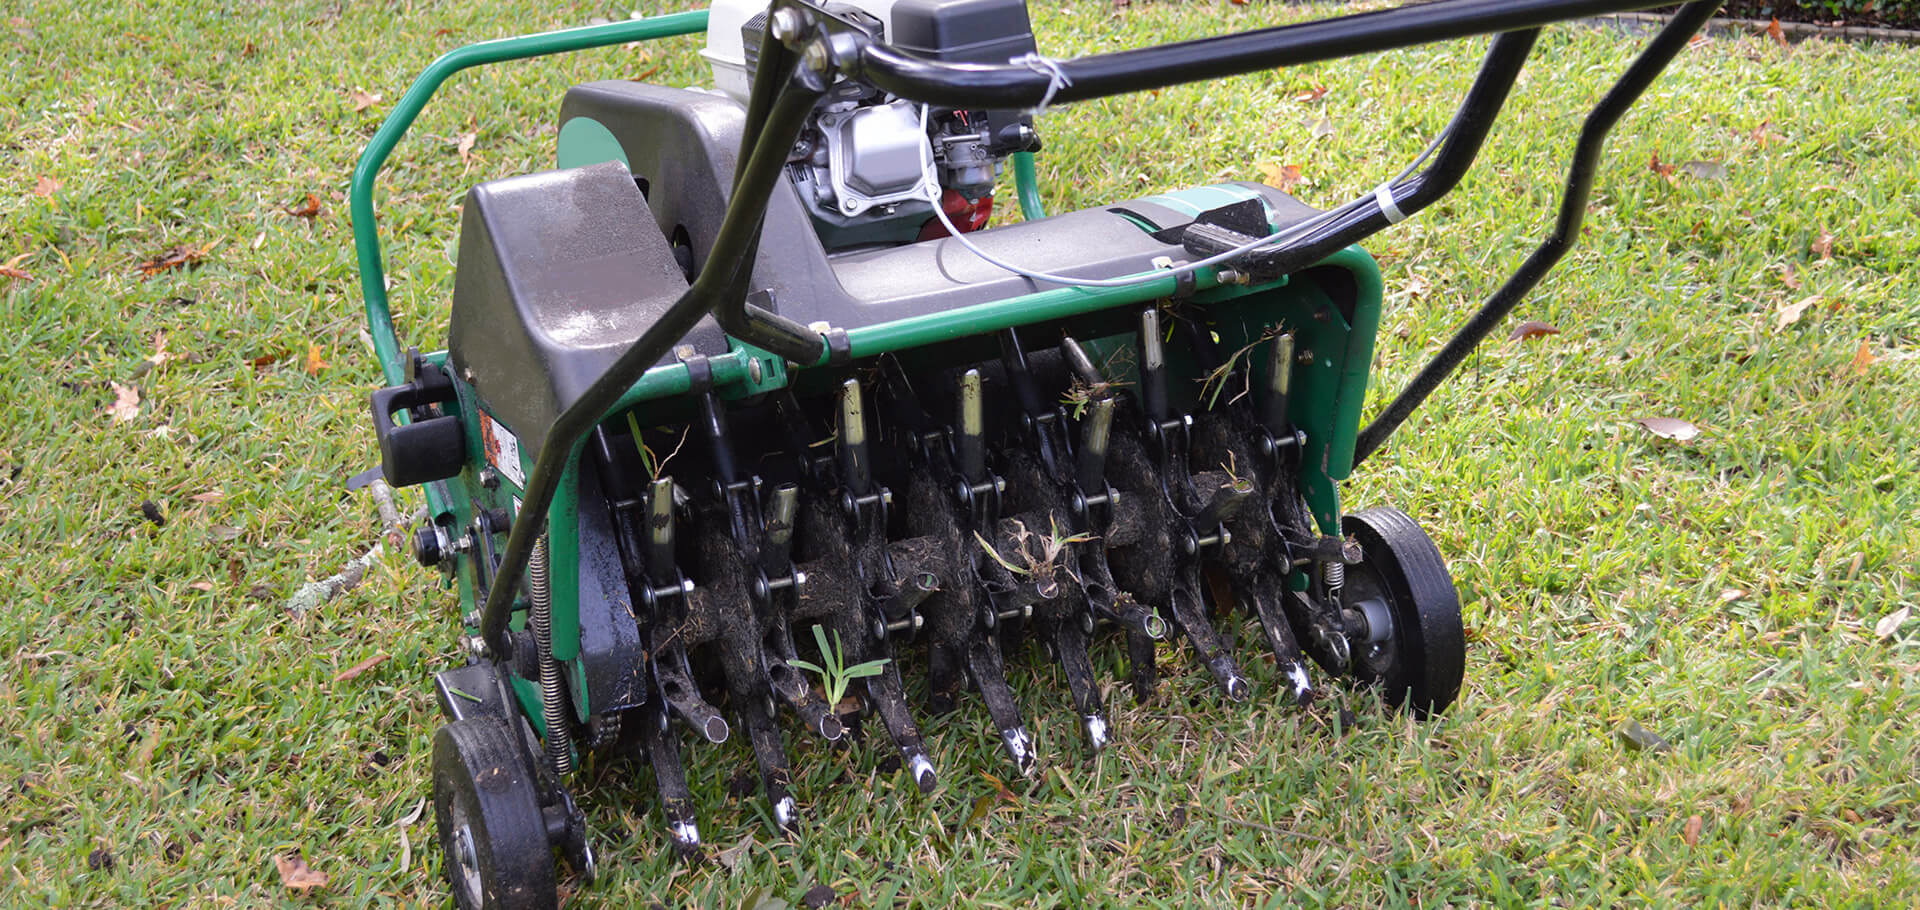 Aerating your lawn: why and when you should do it